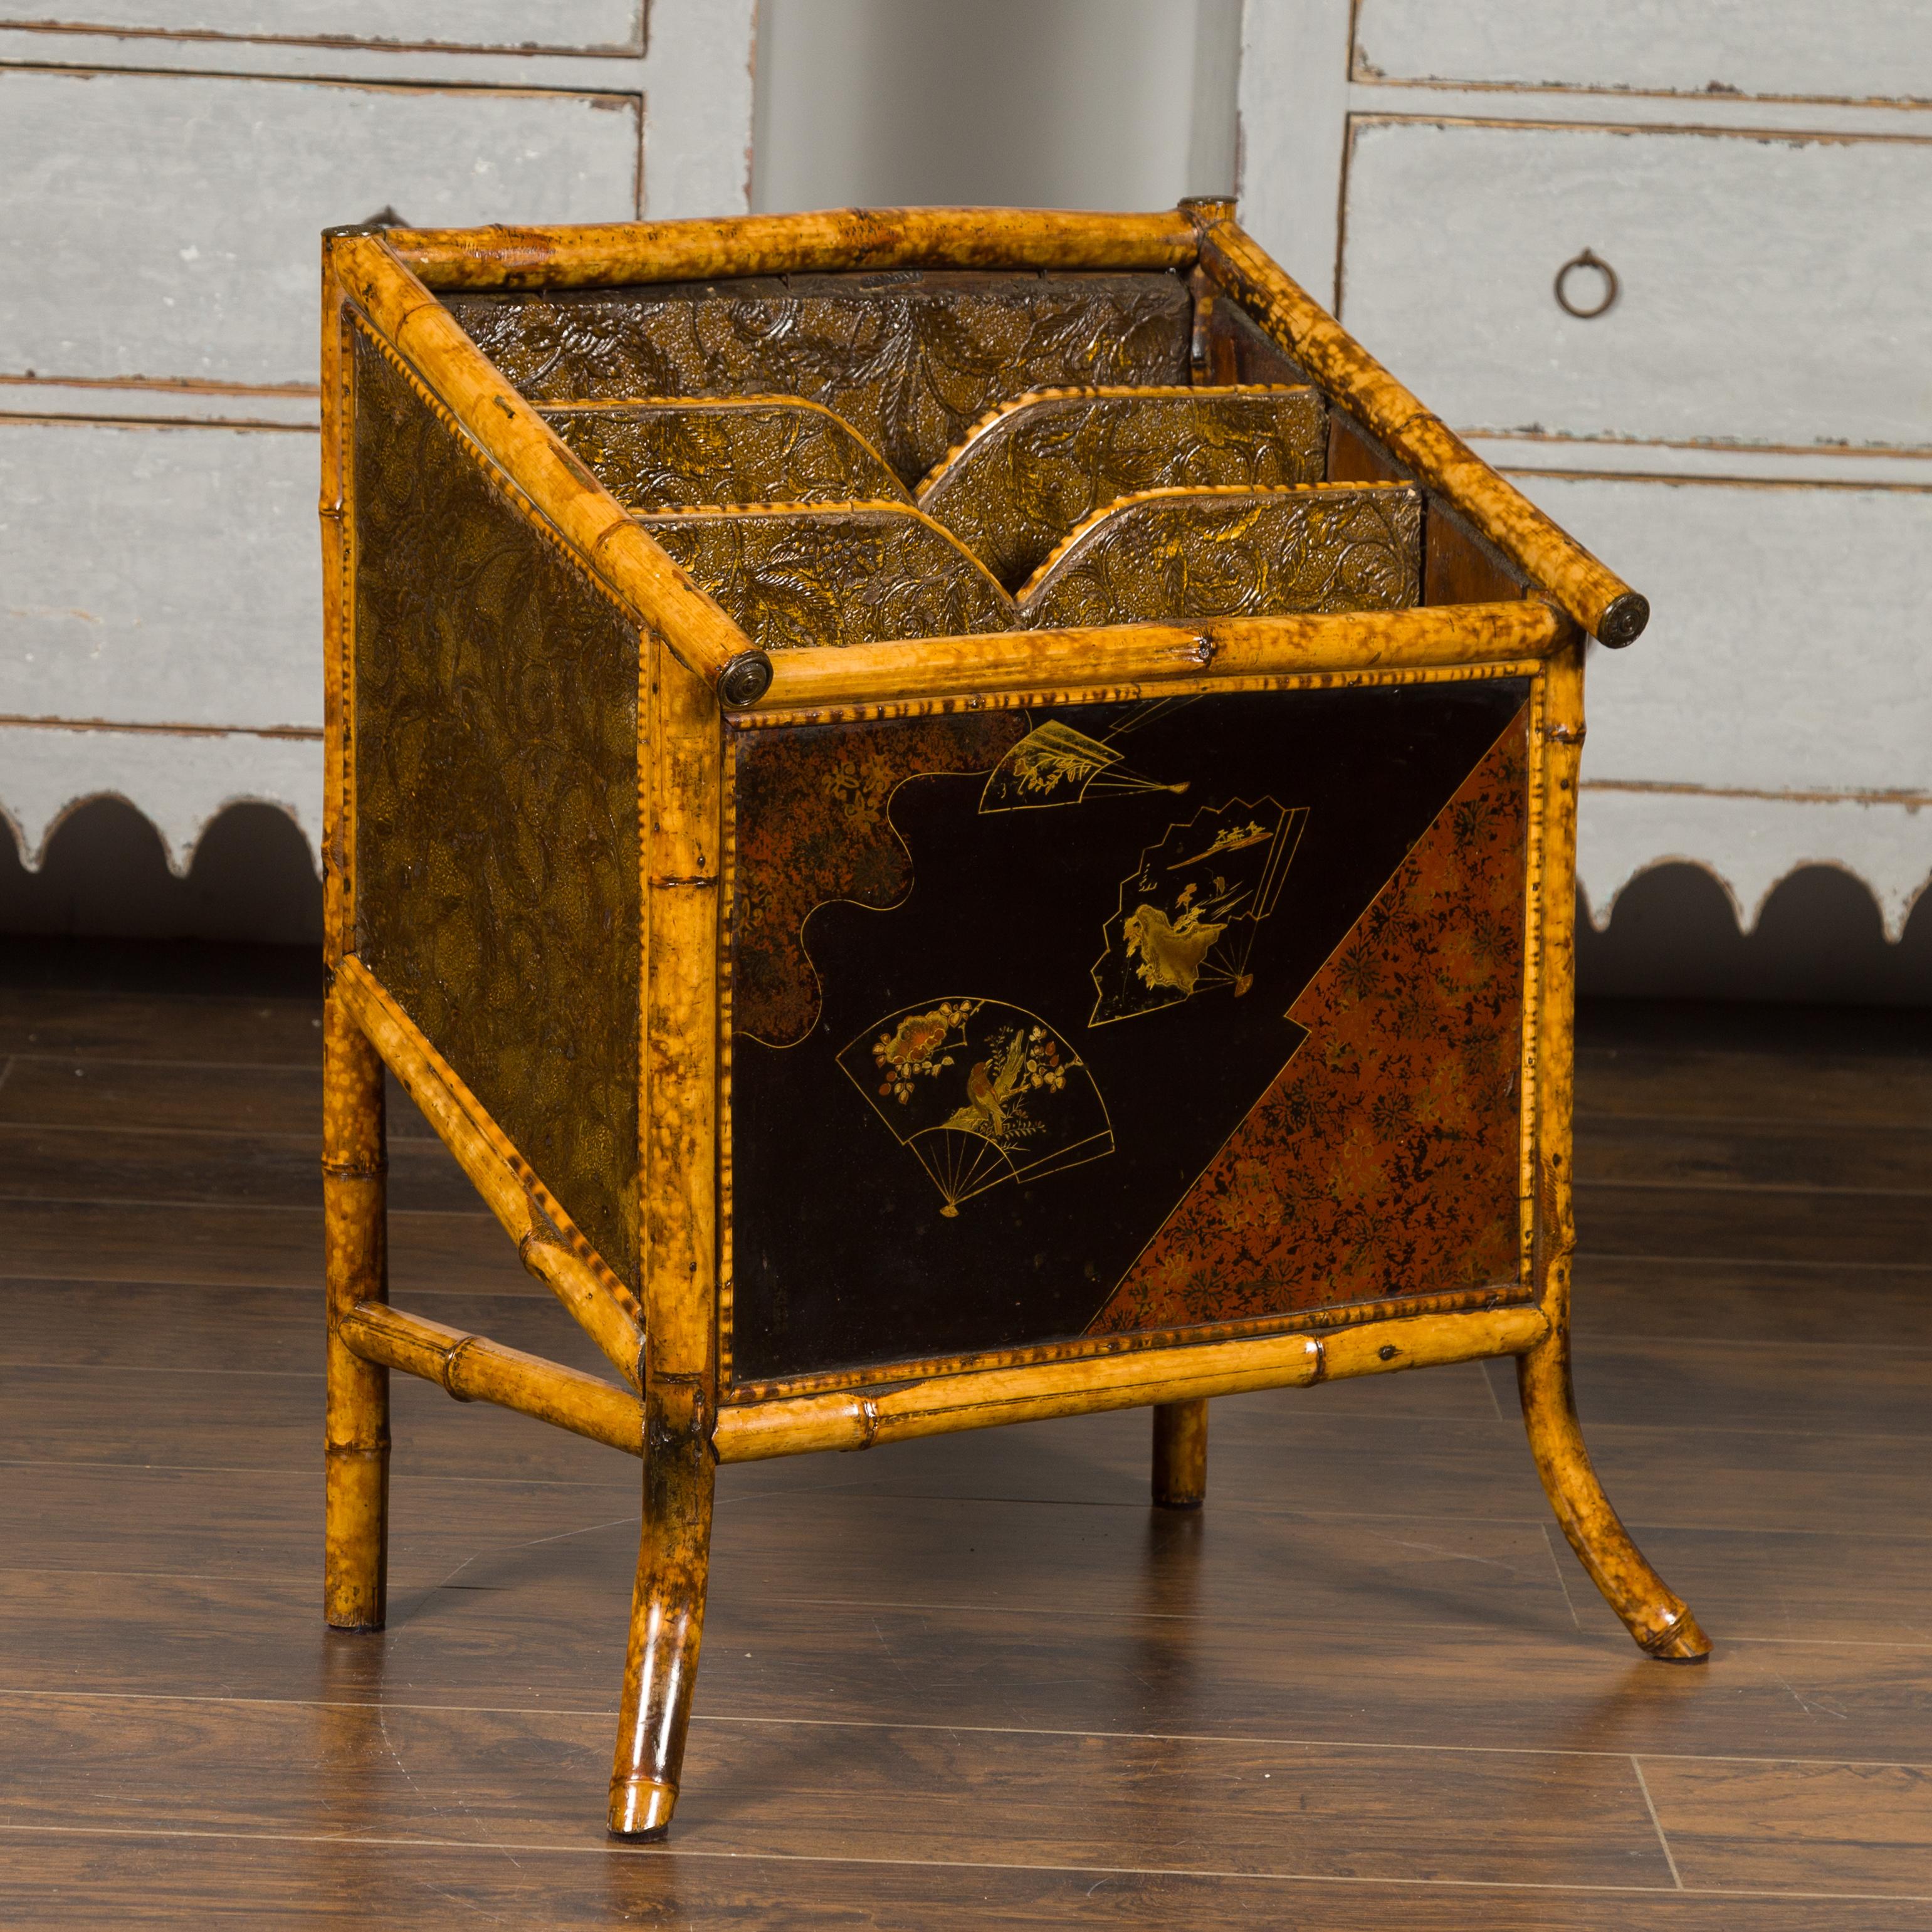 An English bamboo Canterbury from the early 19th century, with embossed leather and Chinoiserie motifs. Born in England at the turn of the century, this handsome magazine rack features a bamboo structure securing embossed leather partitions. Adorned